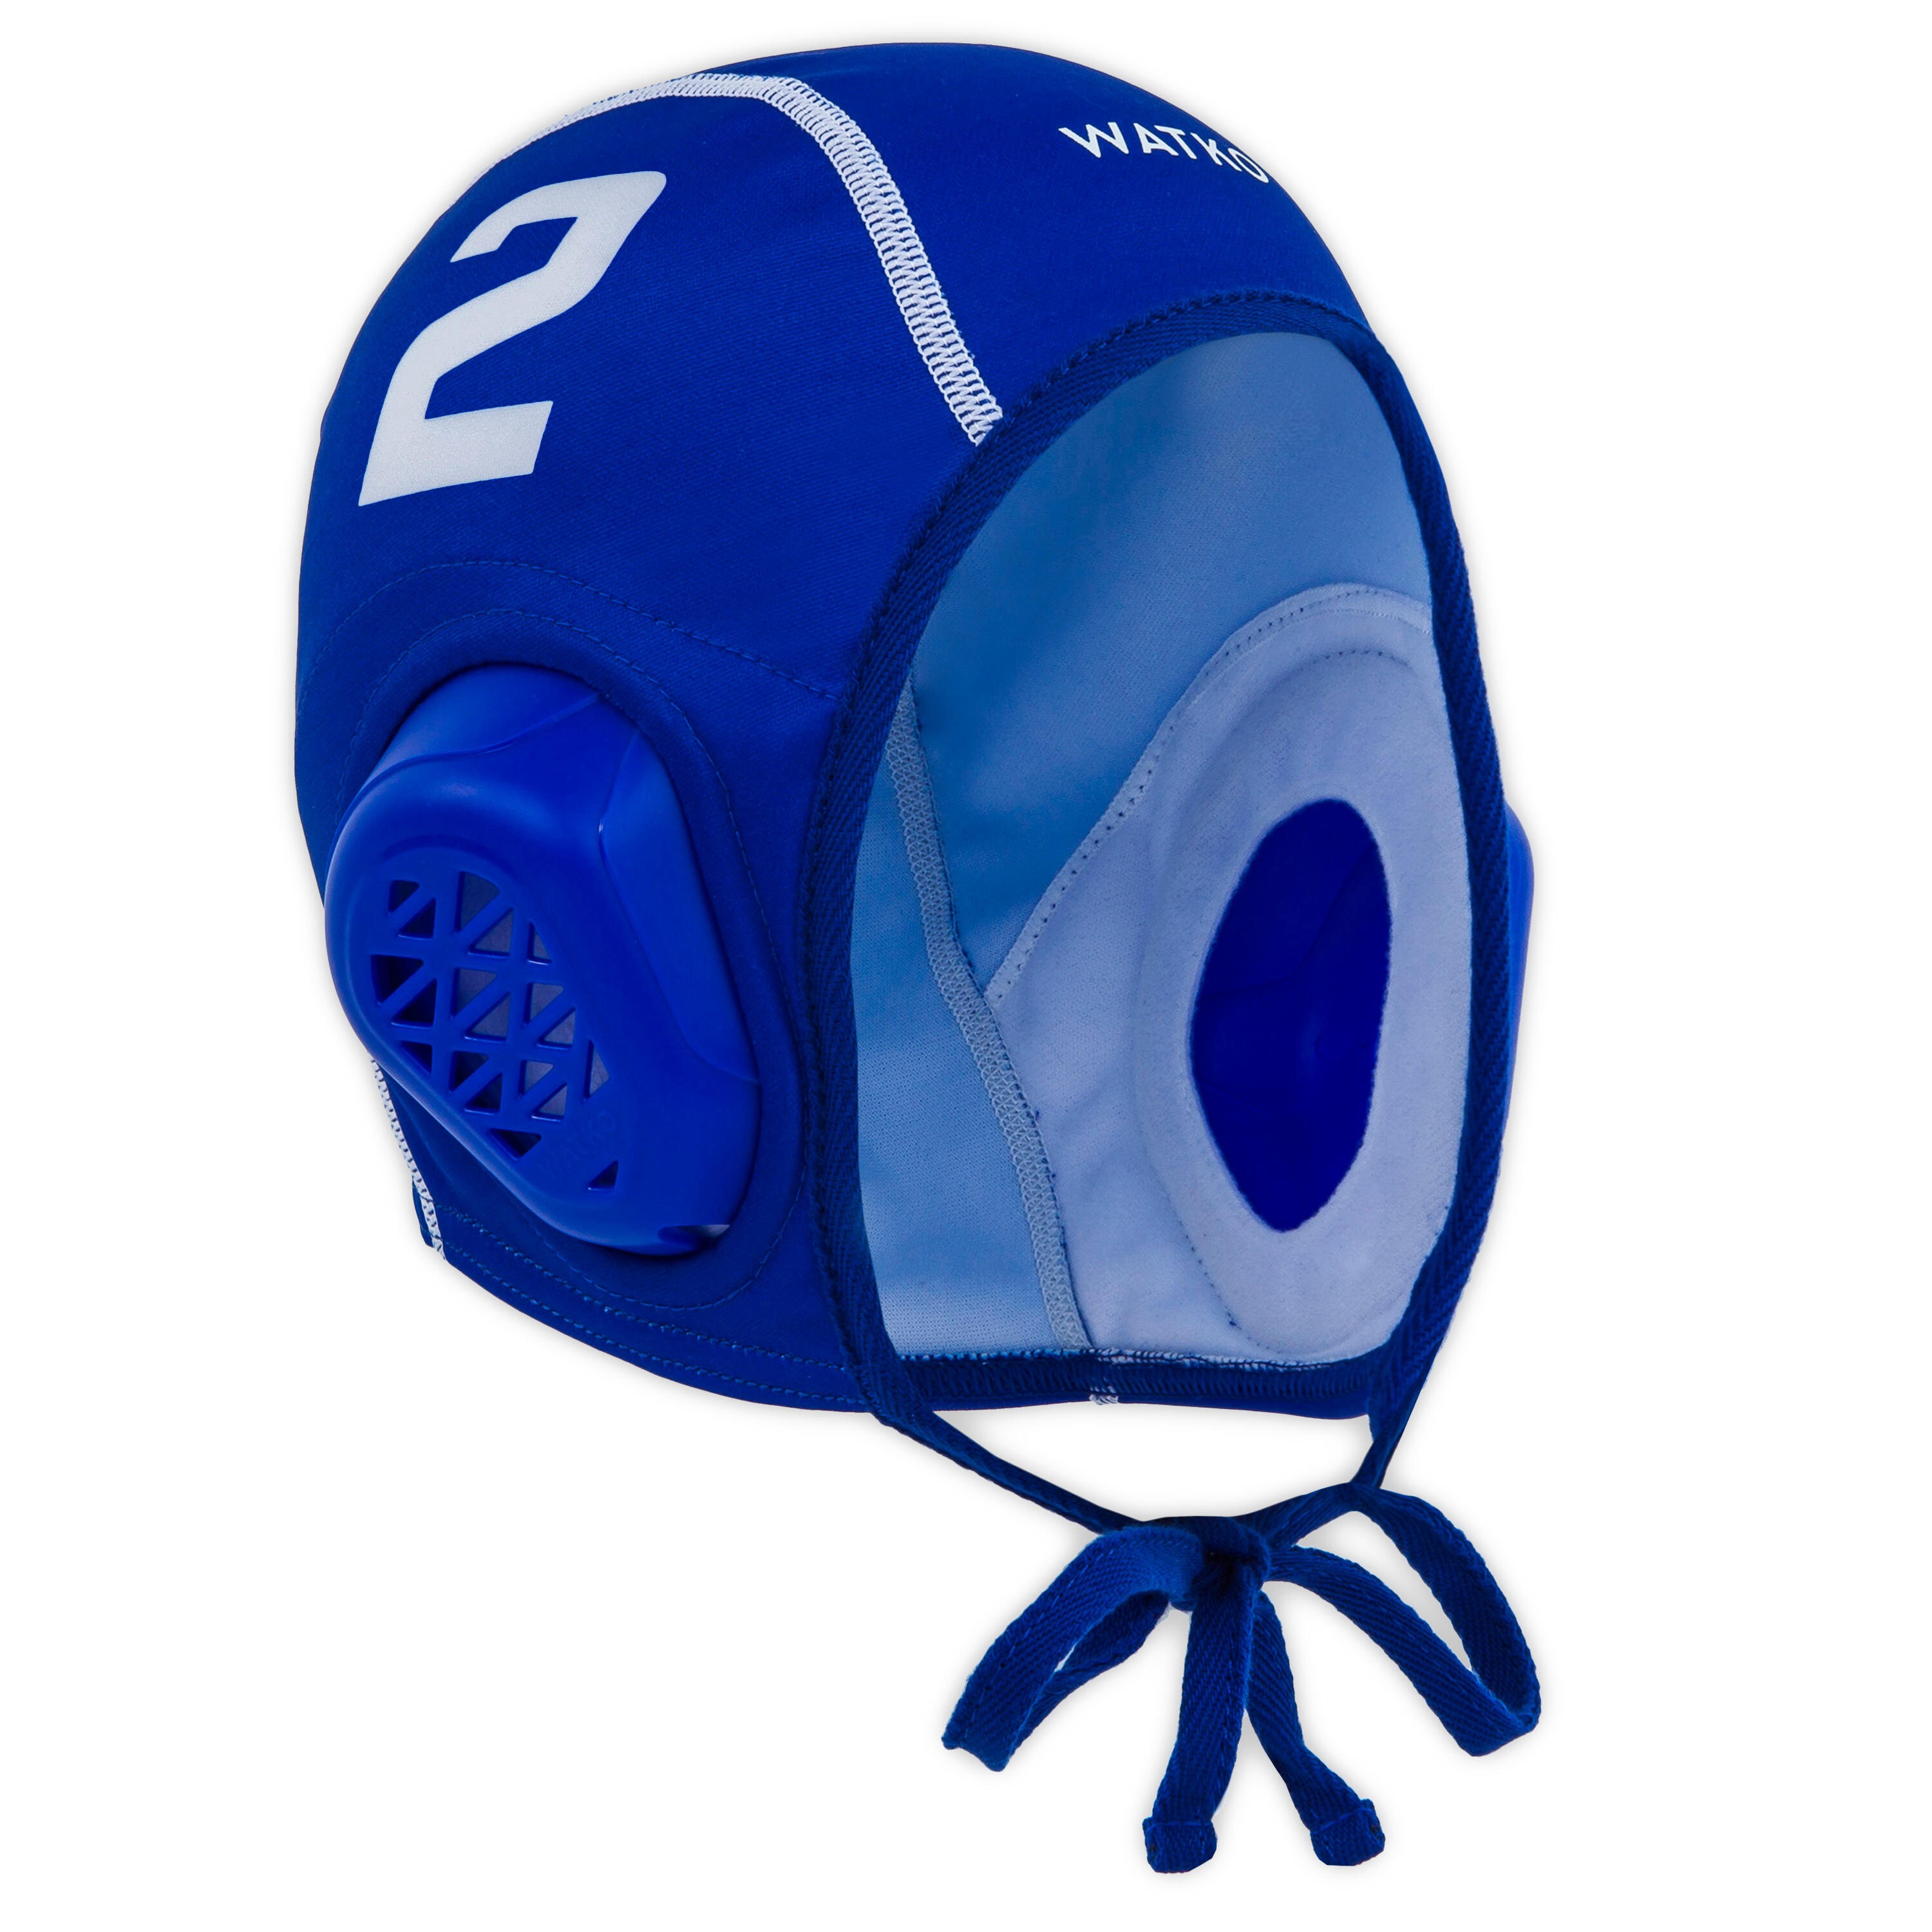 ADULT SET OF 16 CAPS FOR WATER POLO WP900 BLUE 2/7